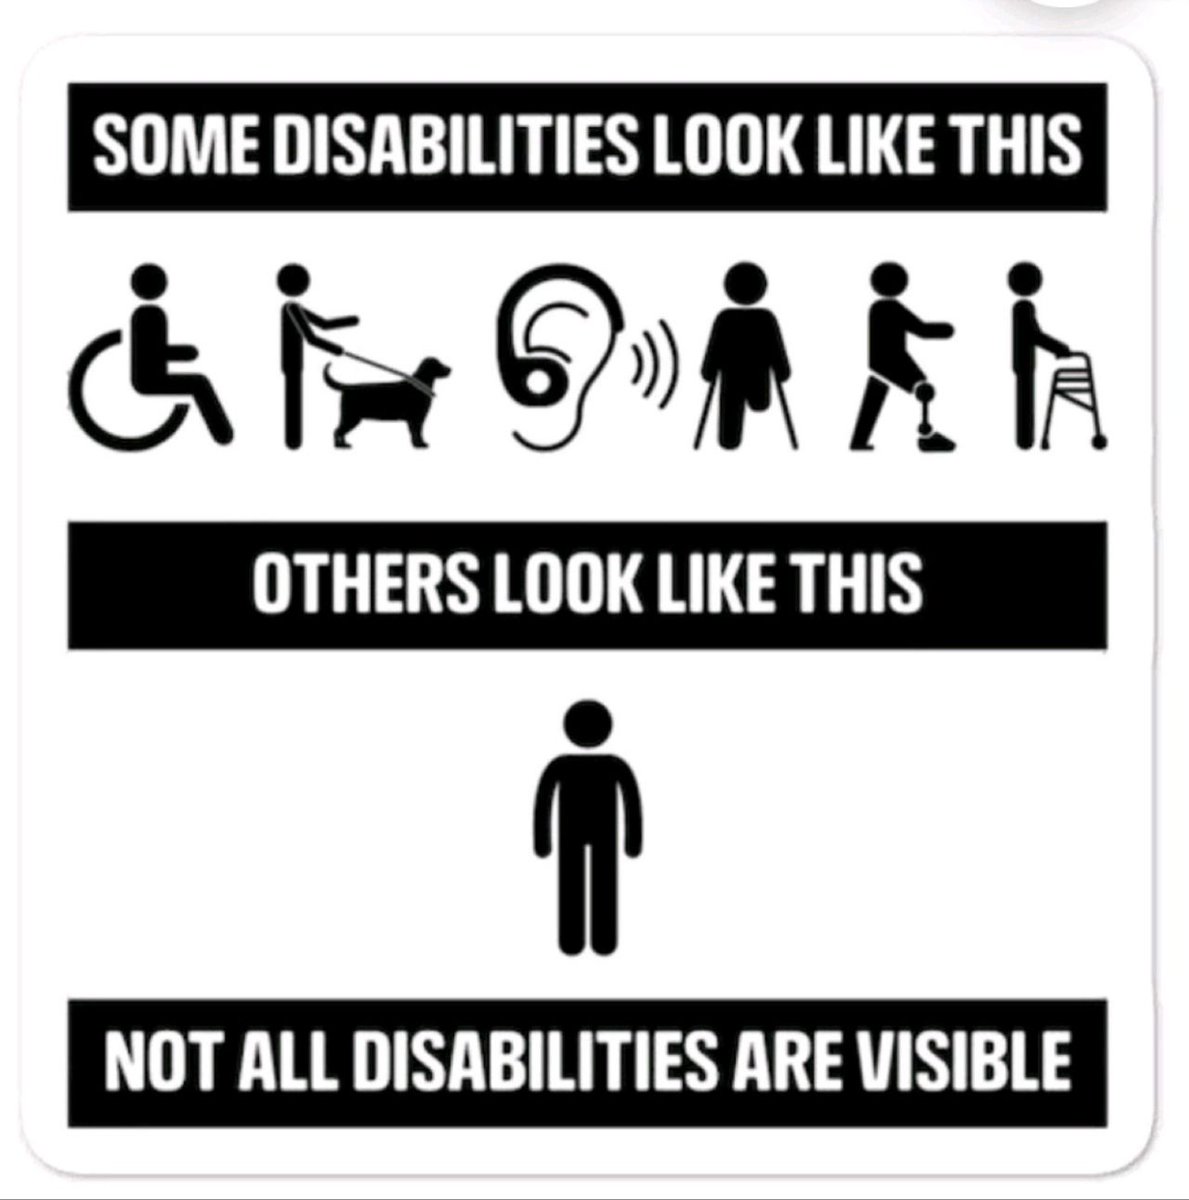 It's International Day of Persons with Disabilities! Don't make assumptions about an individual's disability, find out the facts. It's just a matter of time before you know someone with disabilities or become disabled yourself, so please disable your ignorance. Thanks